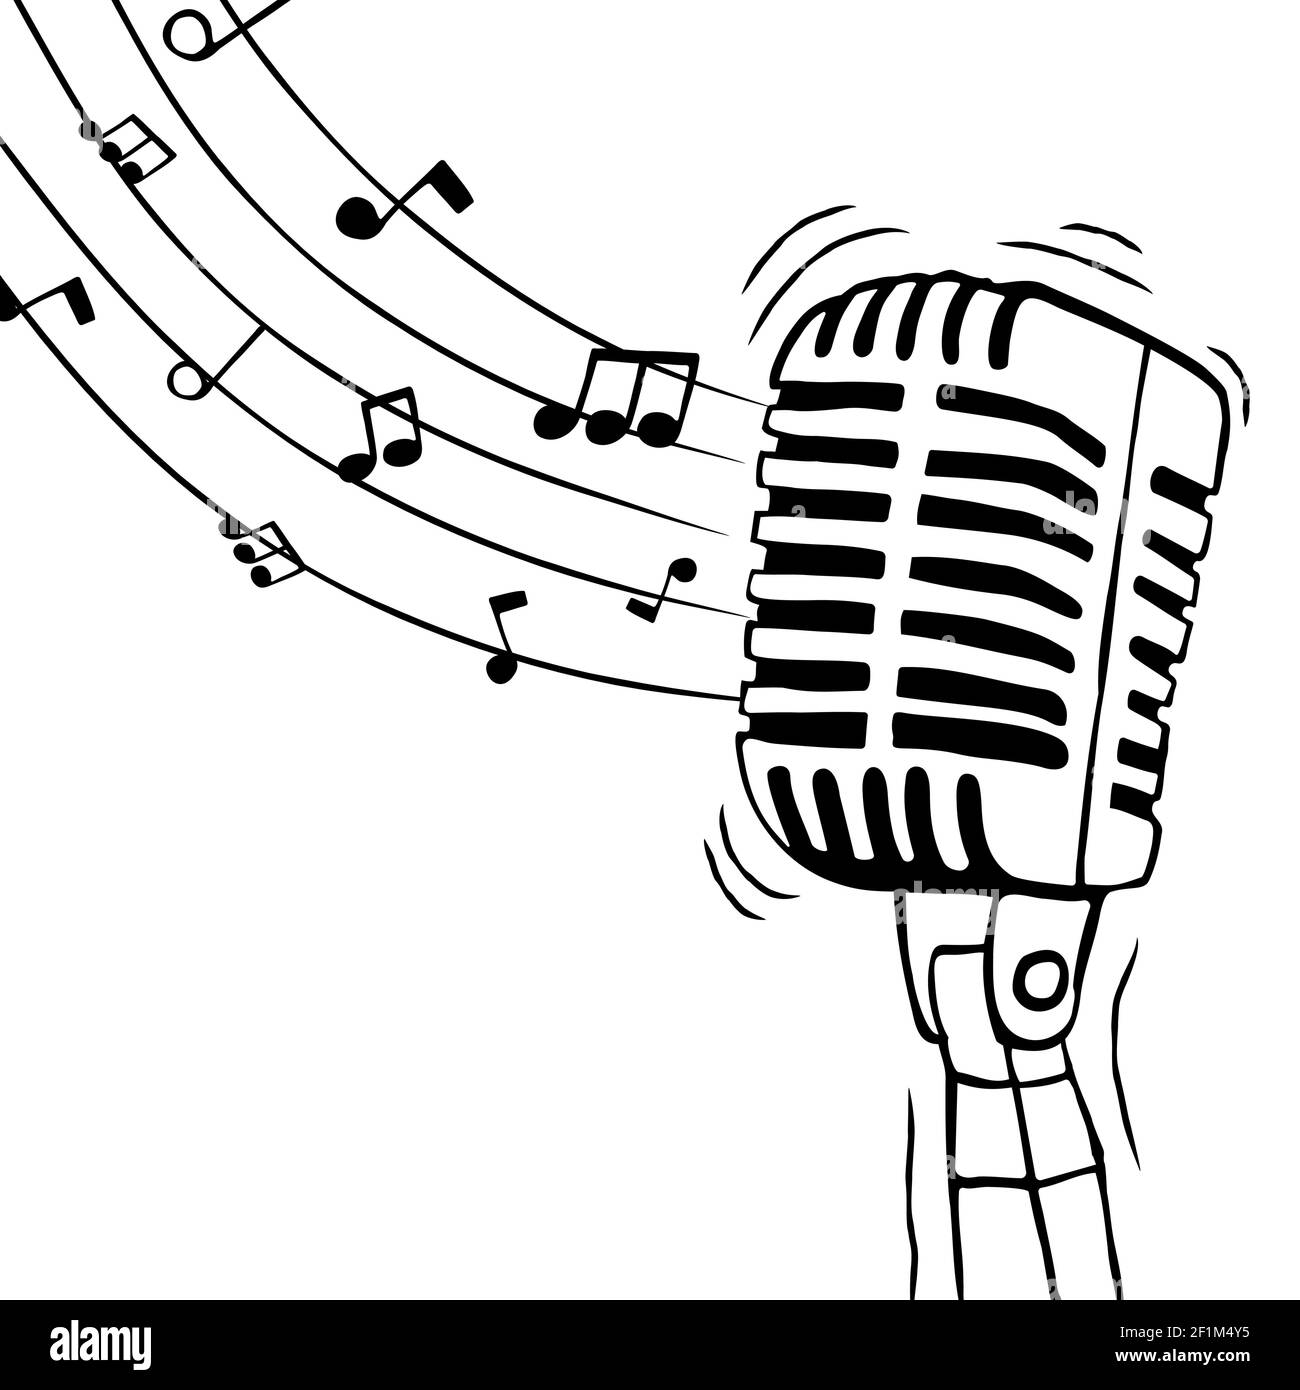 Music notes microphone design Cut Out Stock Images & Pictures - Alamy